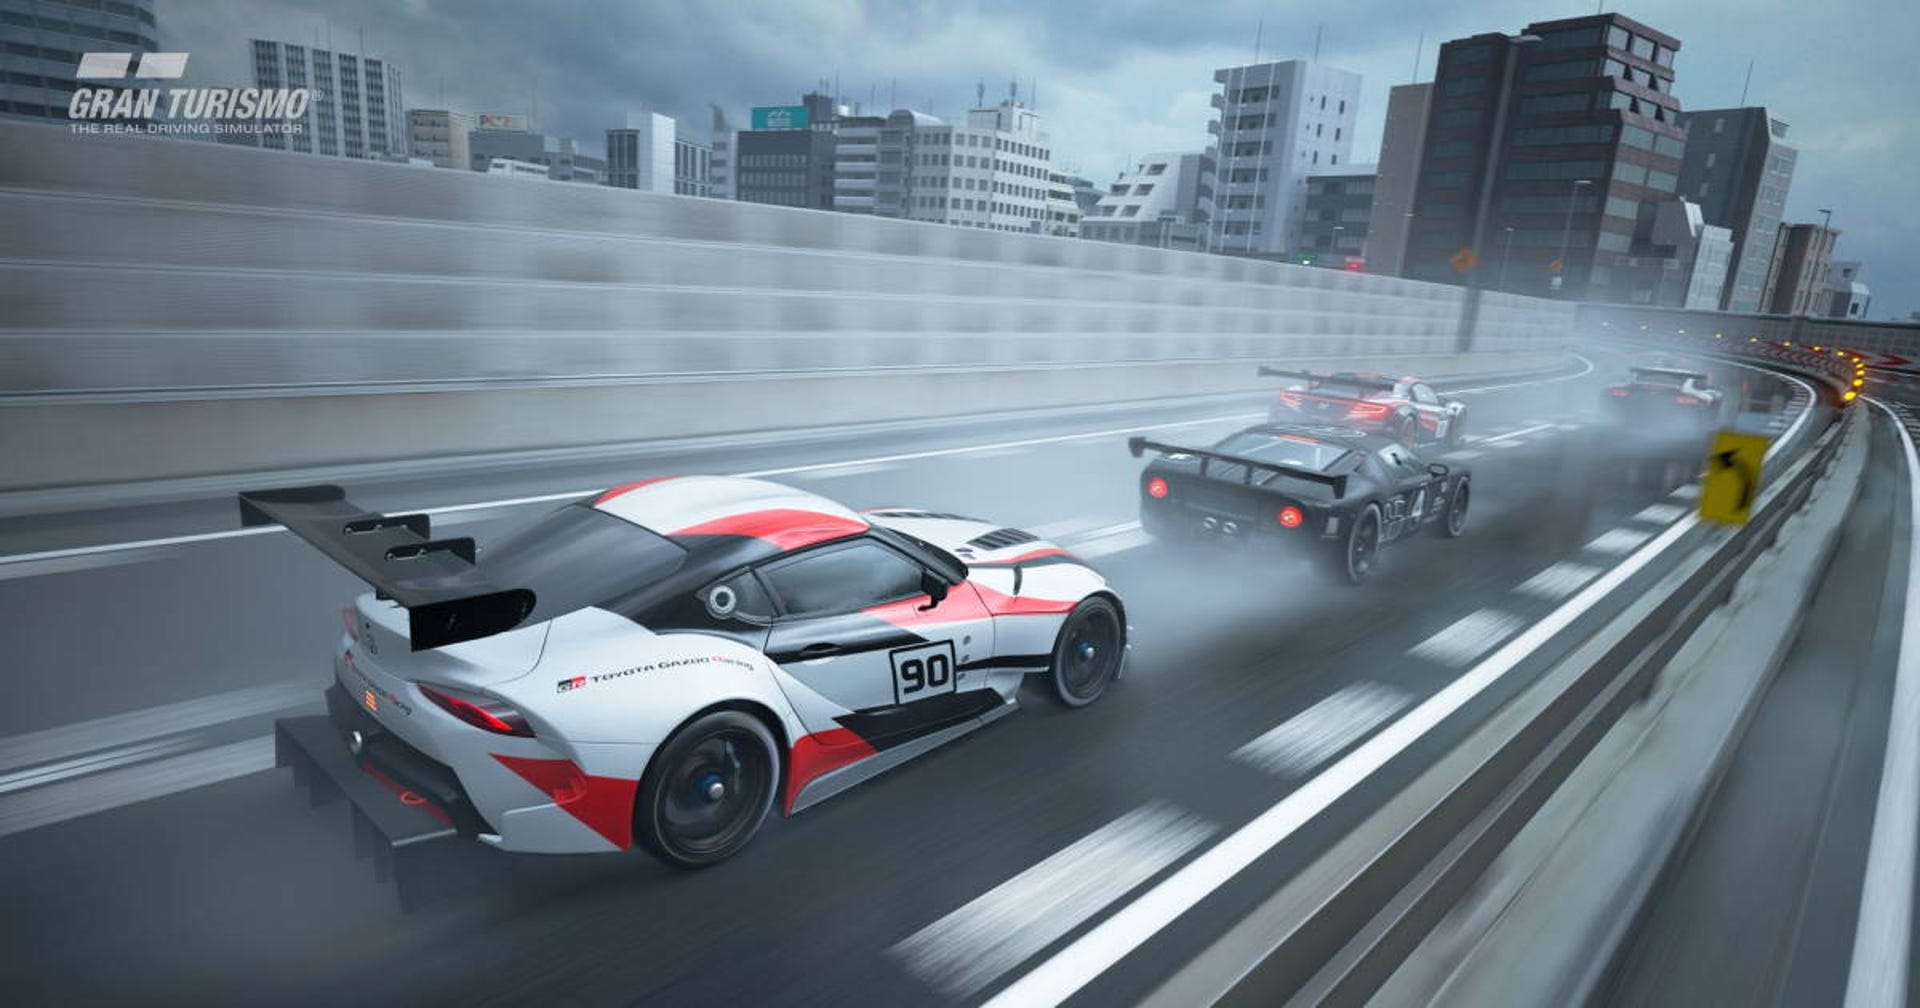 Gran Turismo - movie: where to watch streaming online